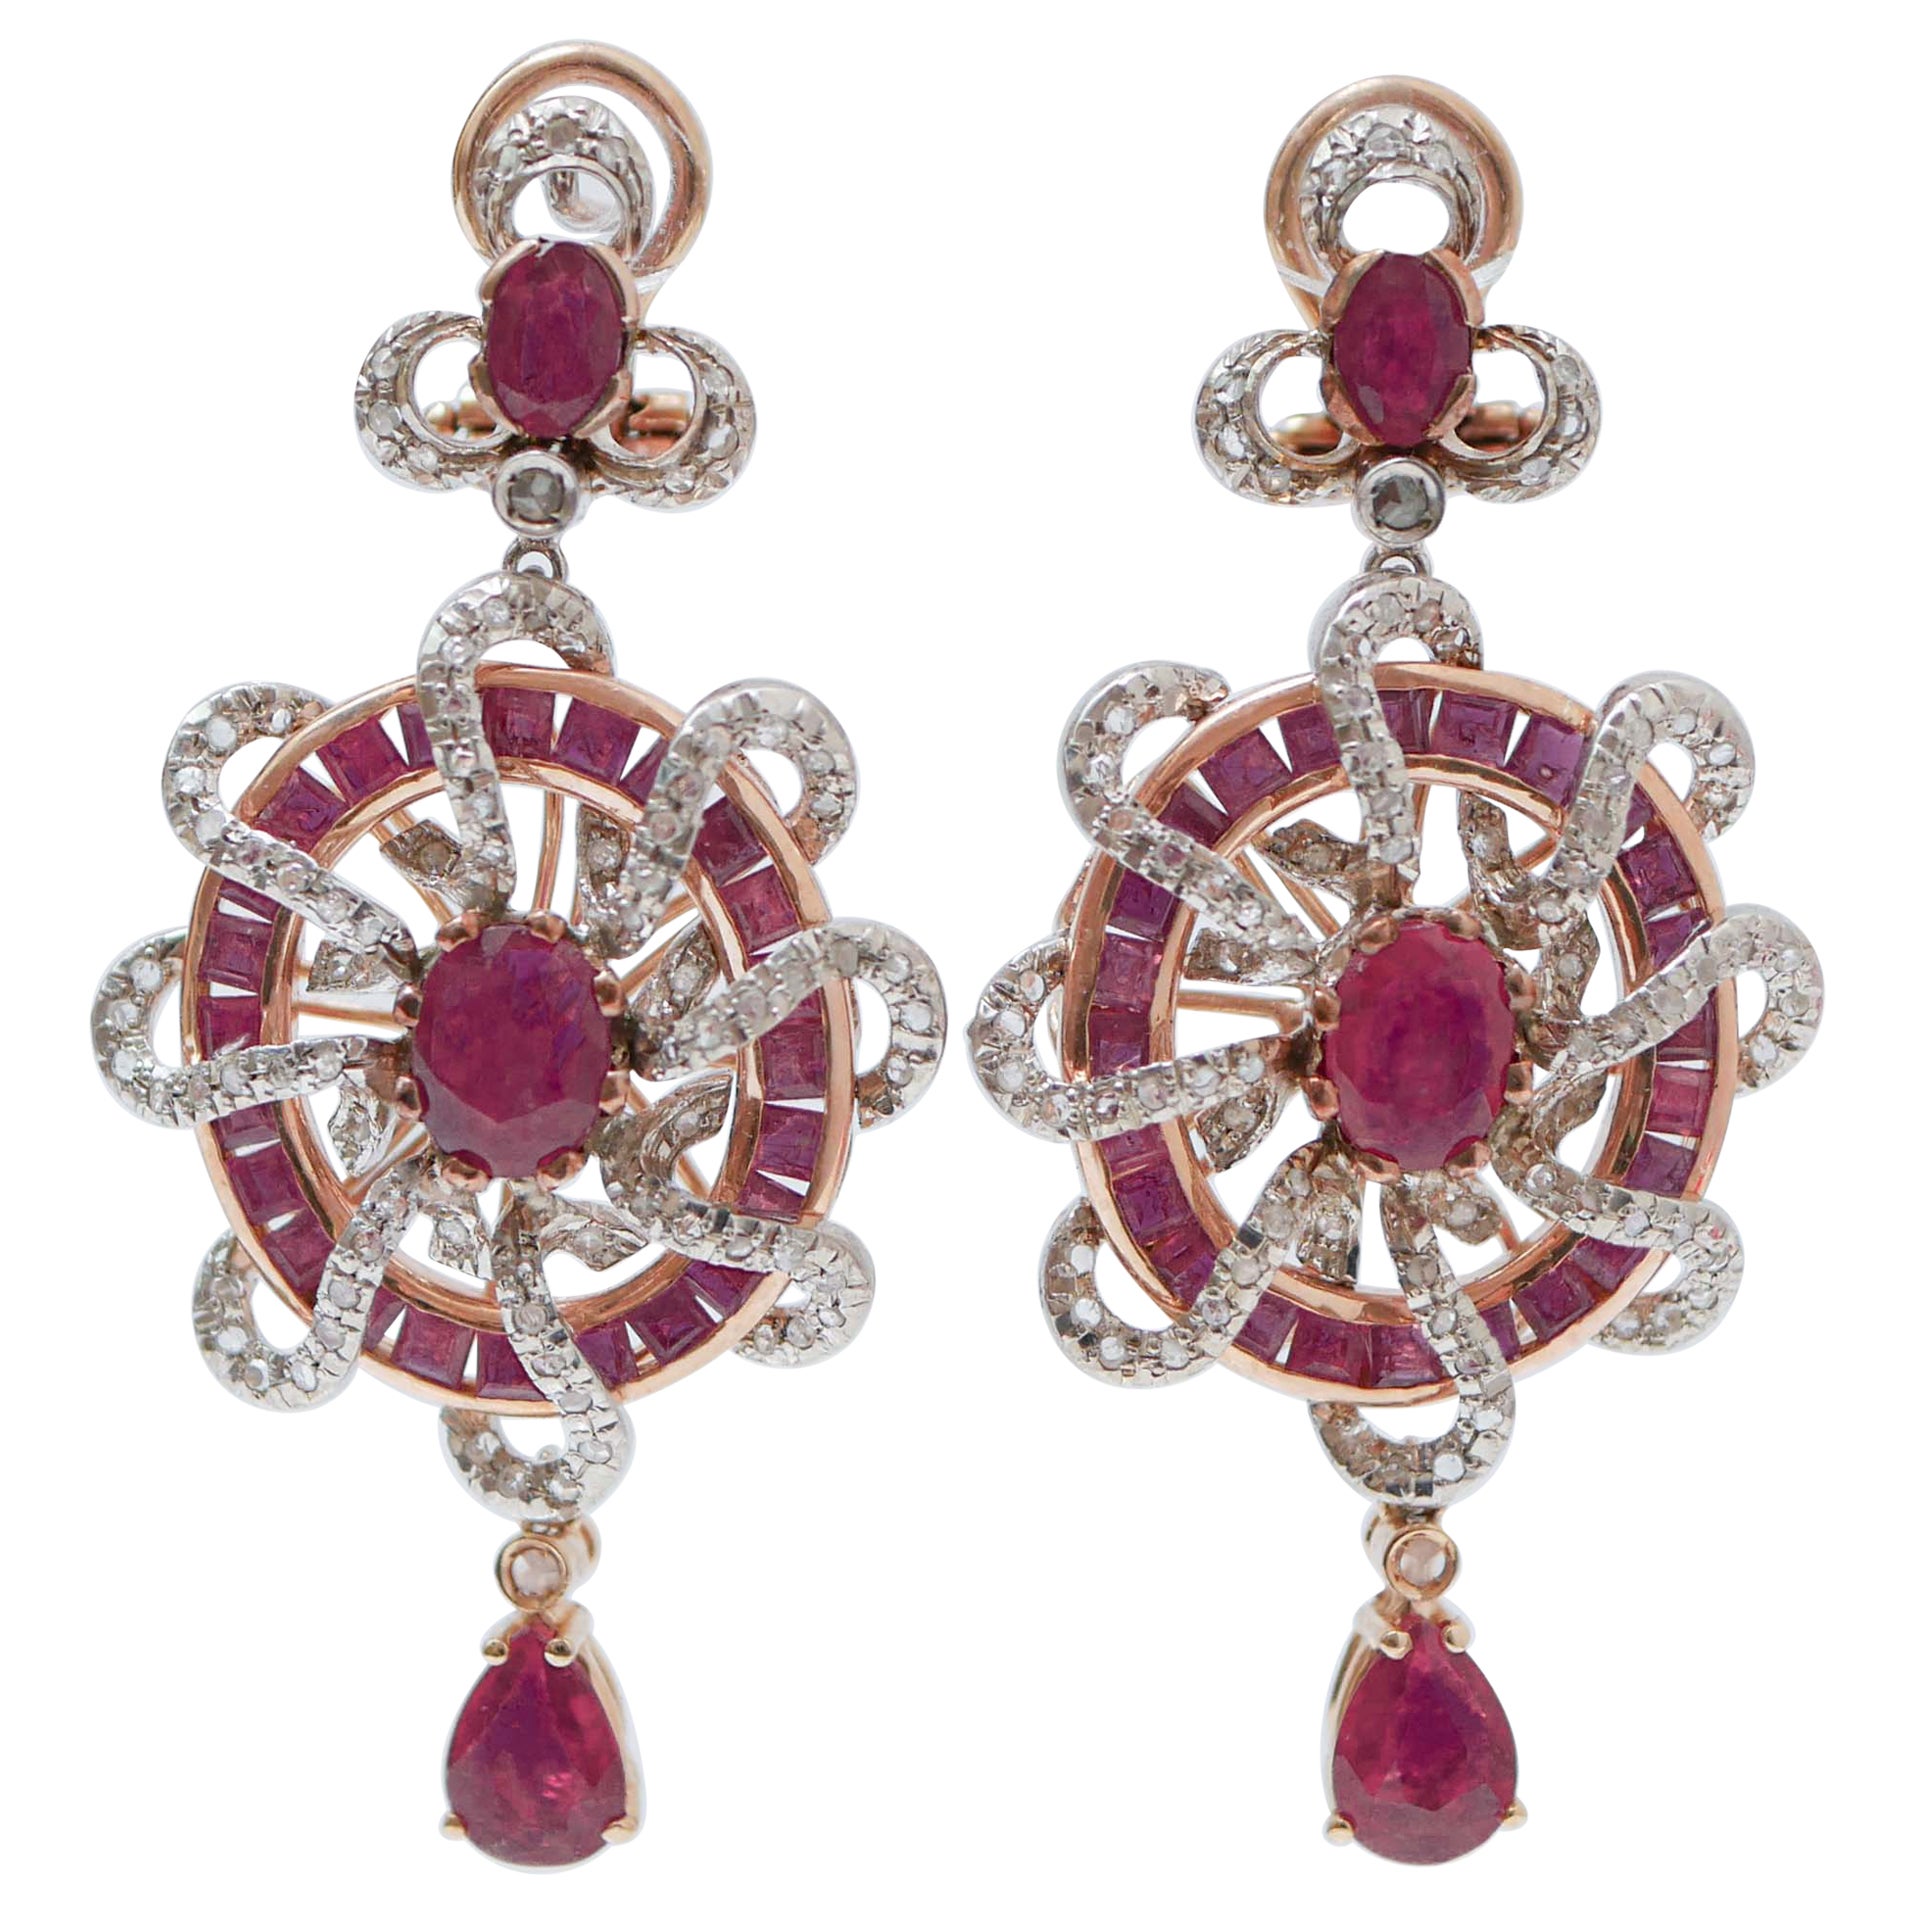 Rubies, Diamonds, Rose Gold and Silver Dangle Earrings.